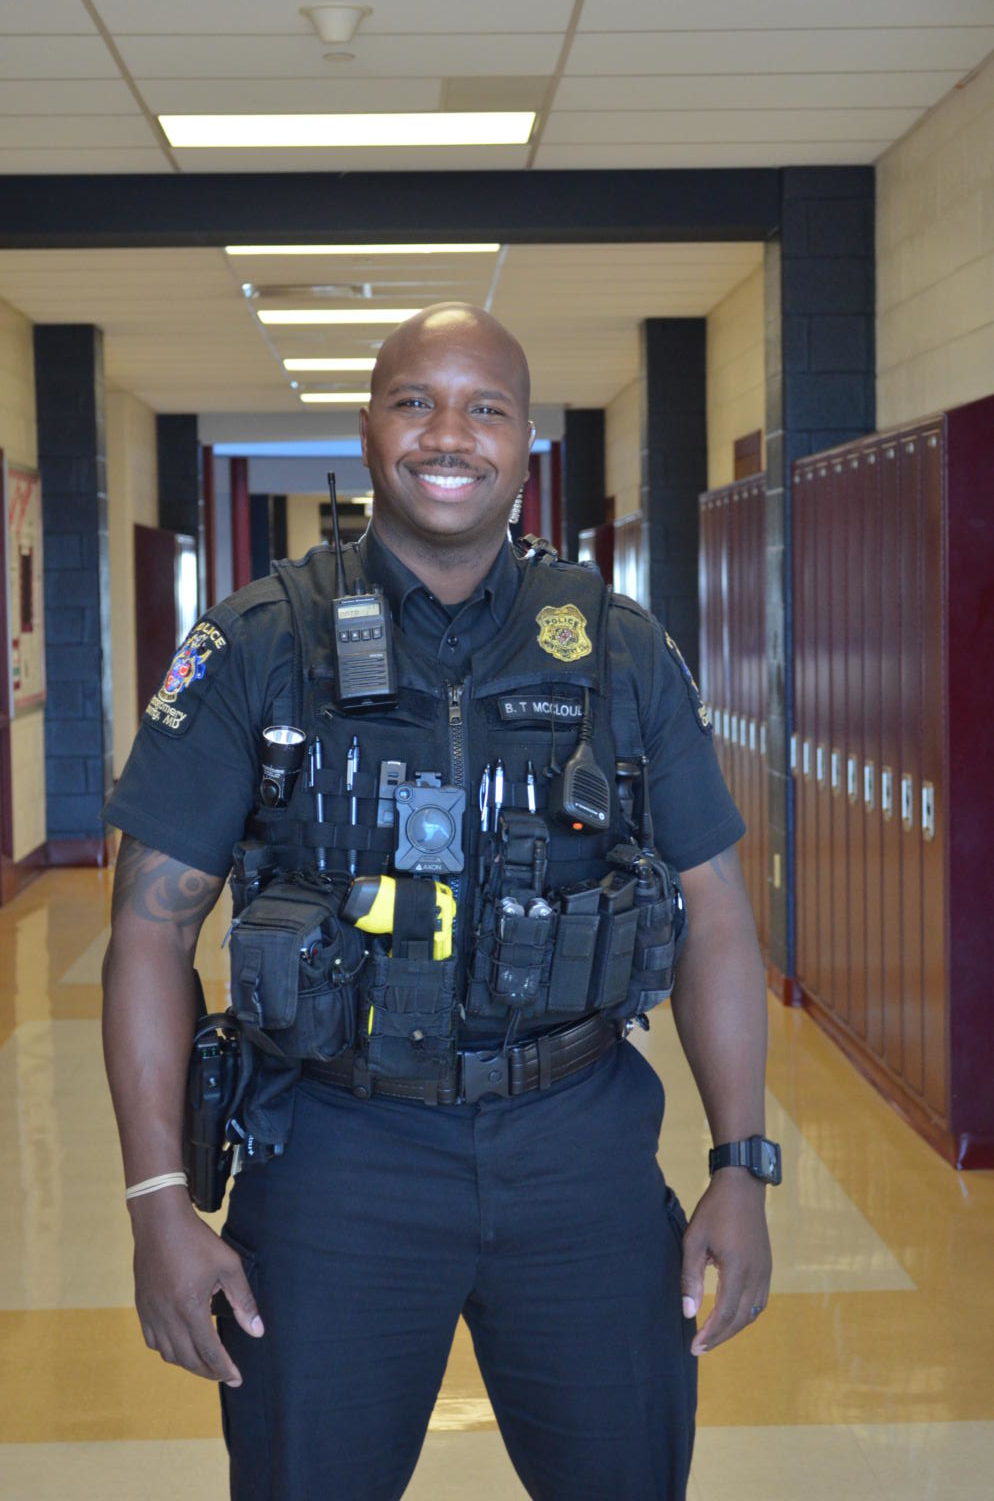 Getting To Know Pbs New School Resource Officer Officer B Hopes To Bring Out The Best In 